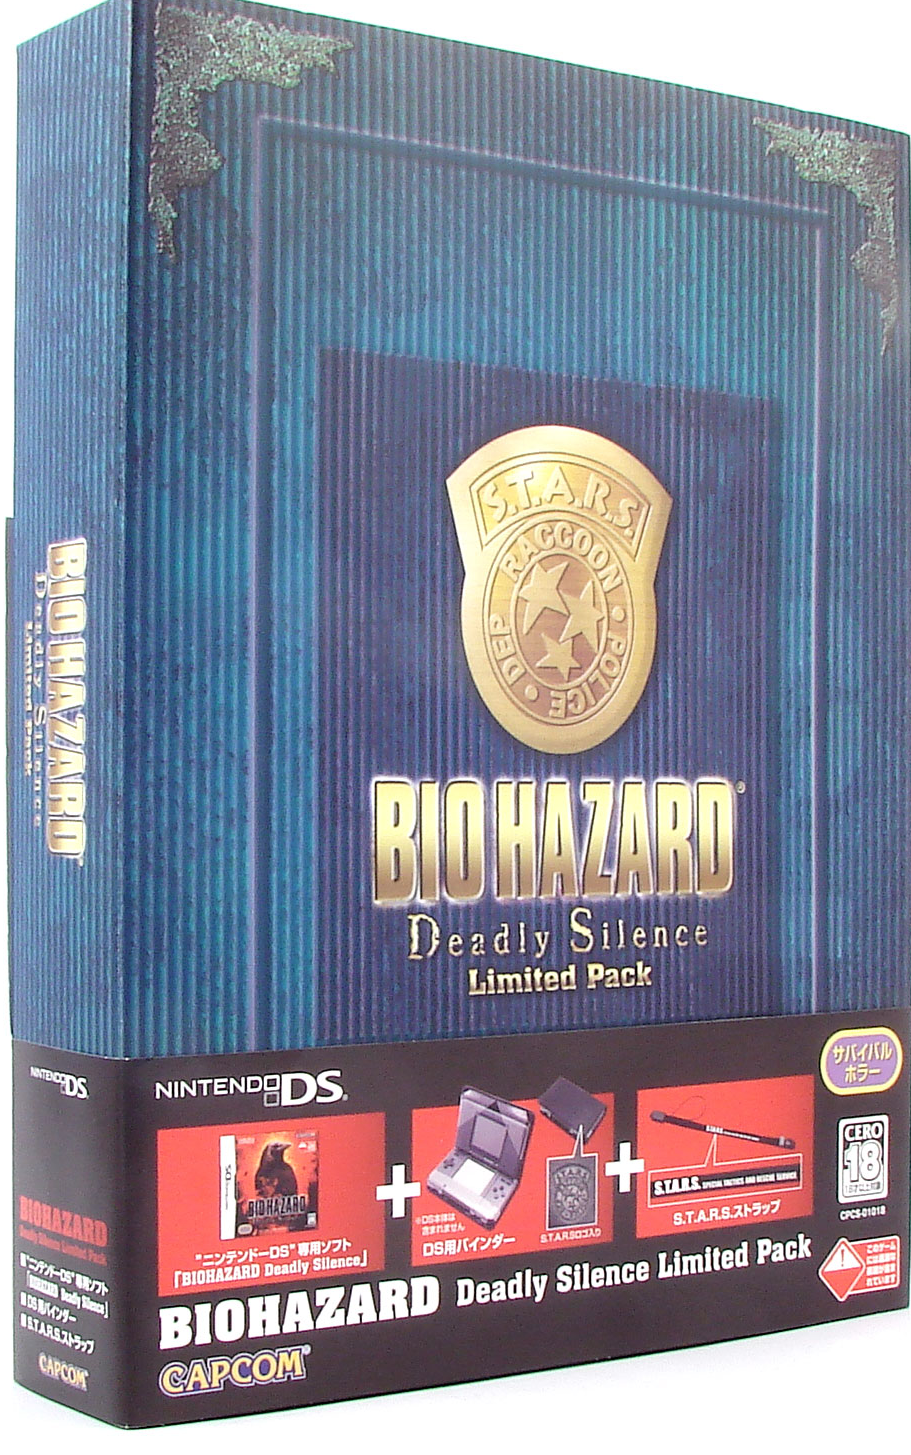 BioHazard: Deadly Silence [Limited Pack] for Nintendo DS